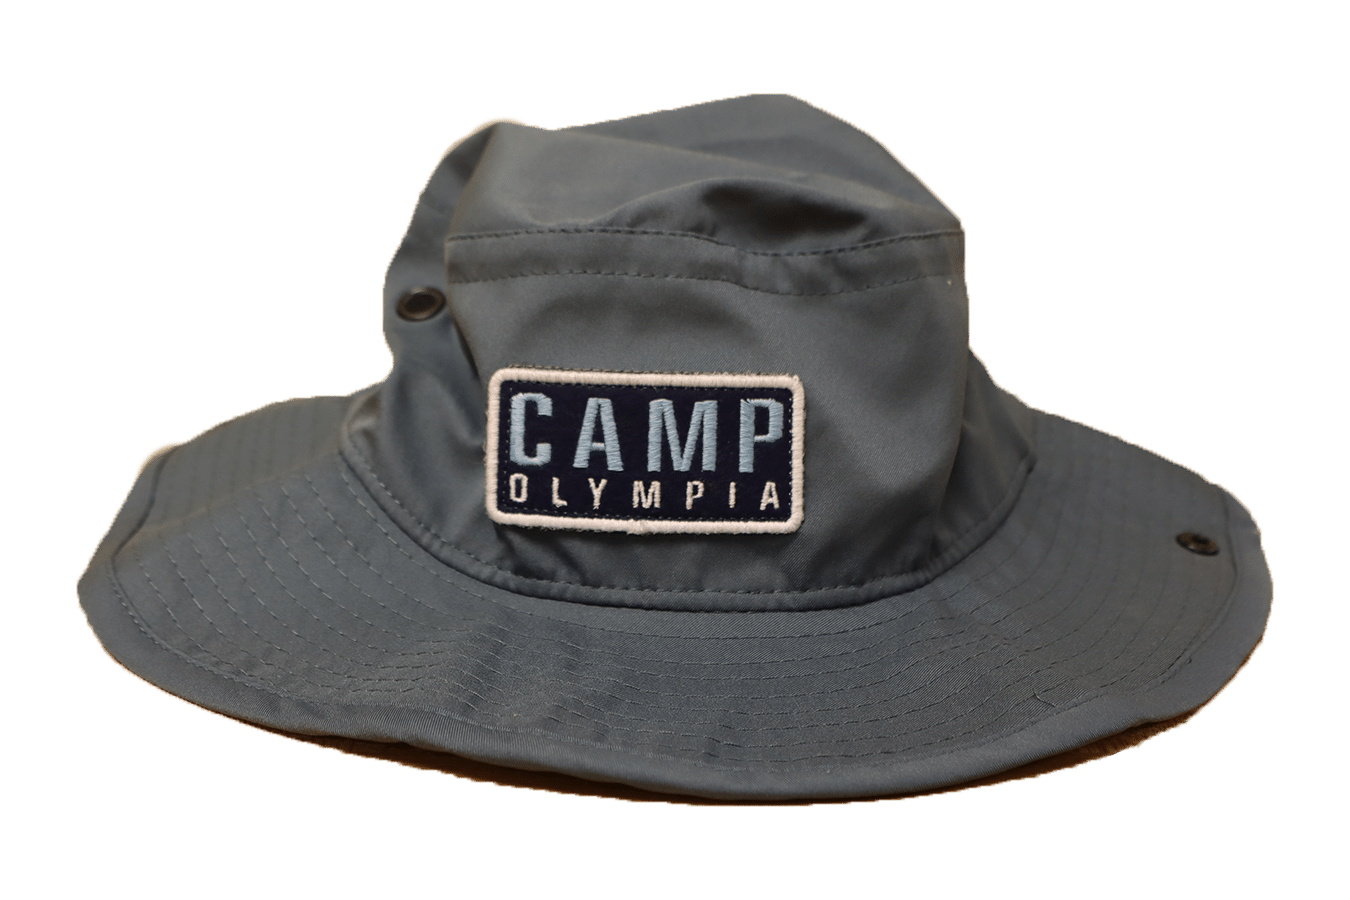 https://www.campolympia.com/wp-content/uploads/2022/04/Camp-Olympia-Fishing-Hat.png